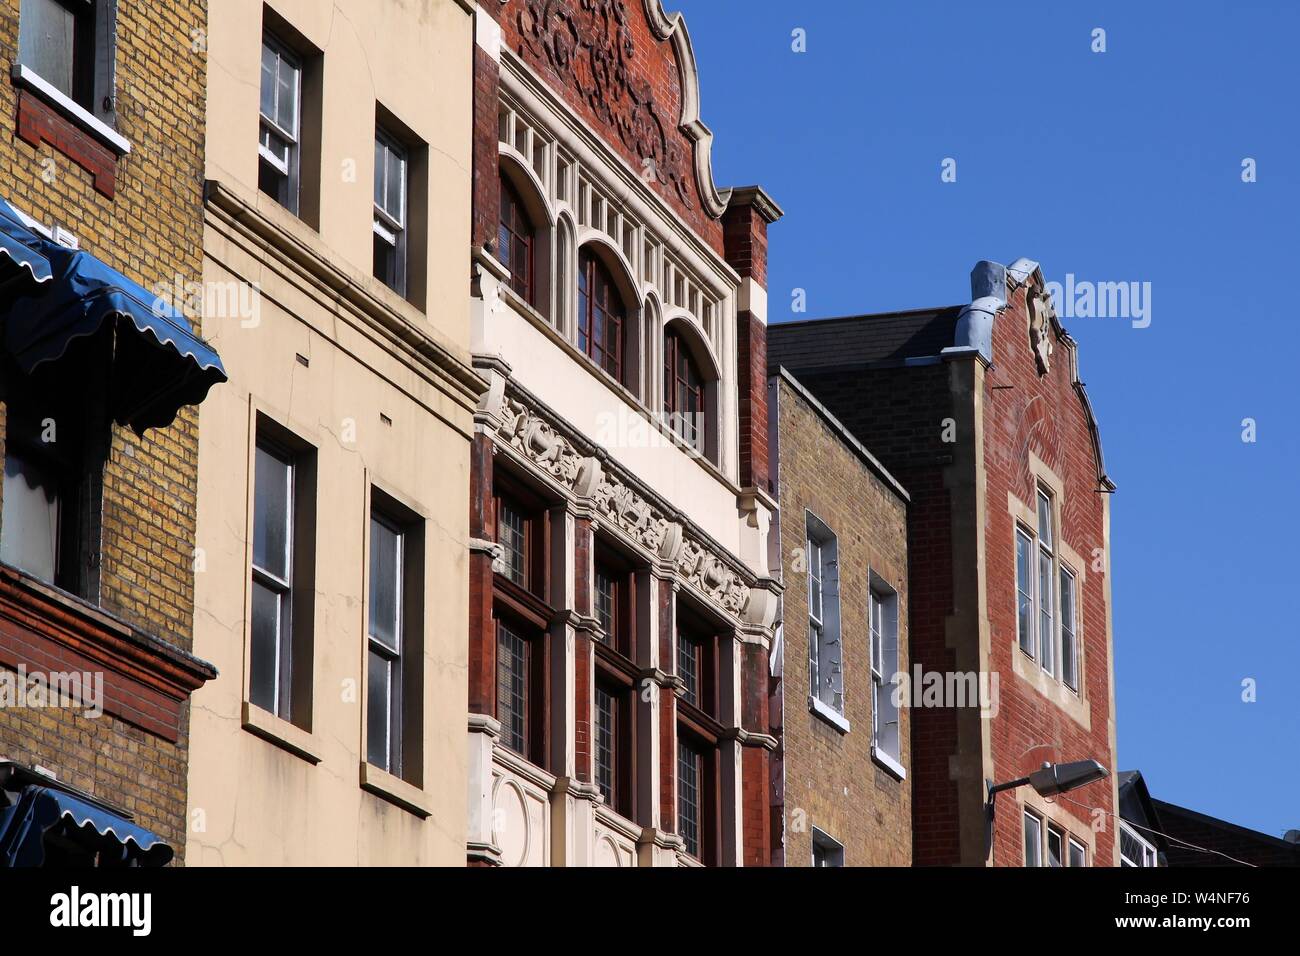 London, United Kingdom - old residential architecture, brick townhouses. Stock Photo